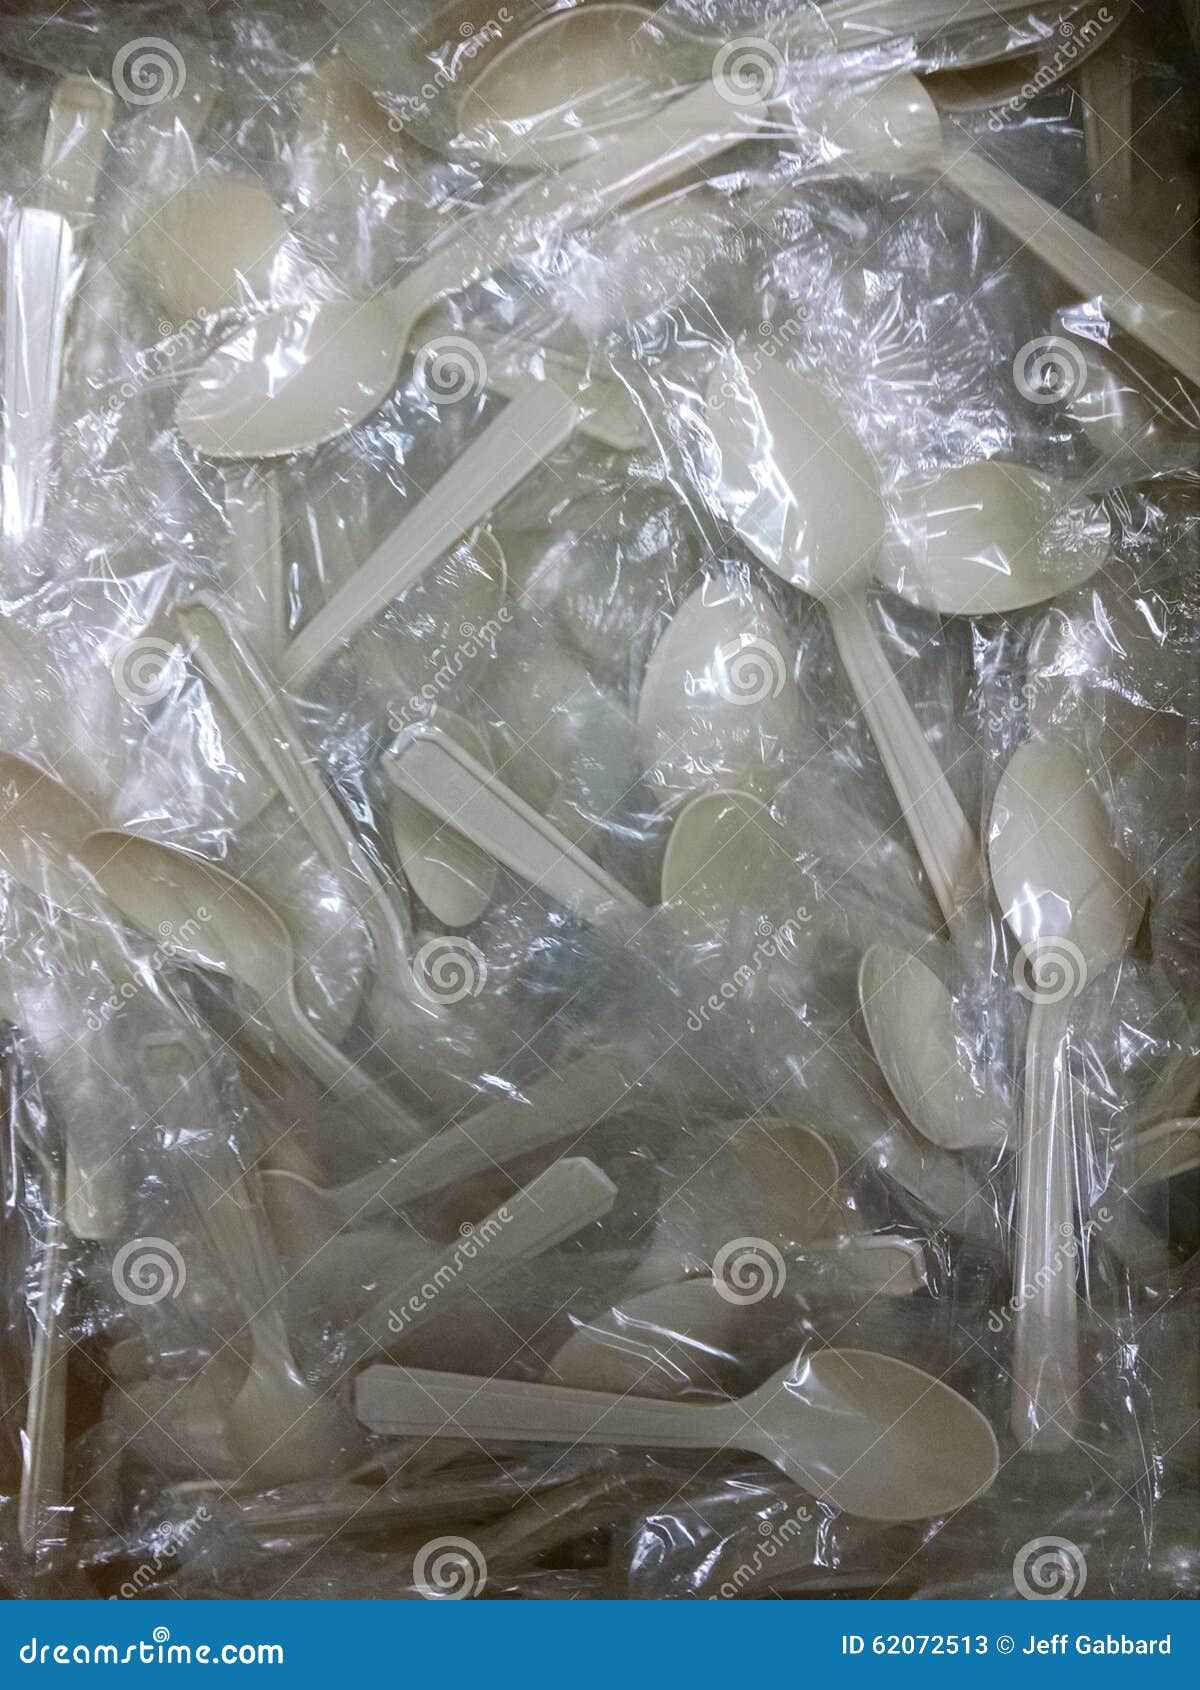 individually wrapped tan plastic spoons